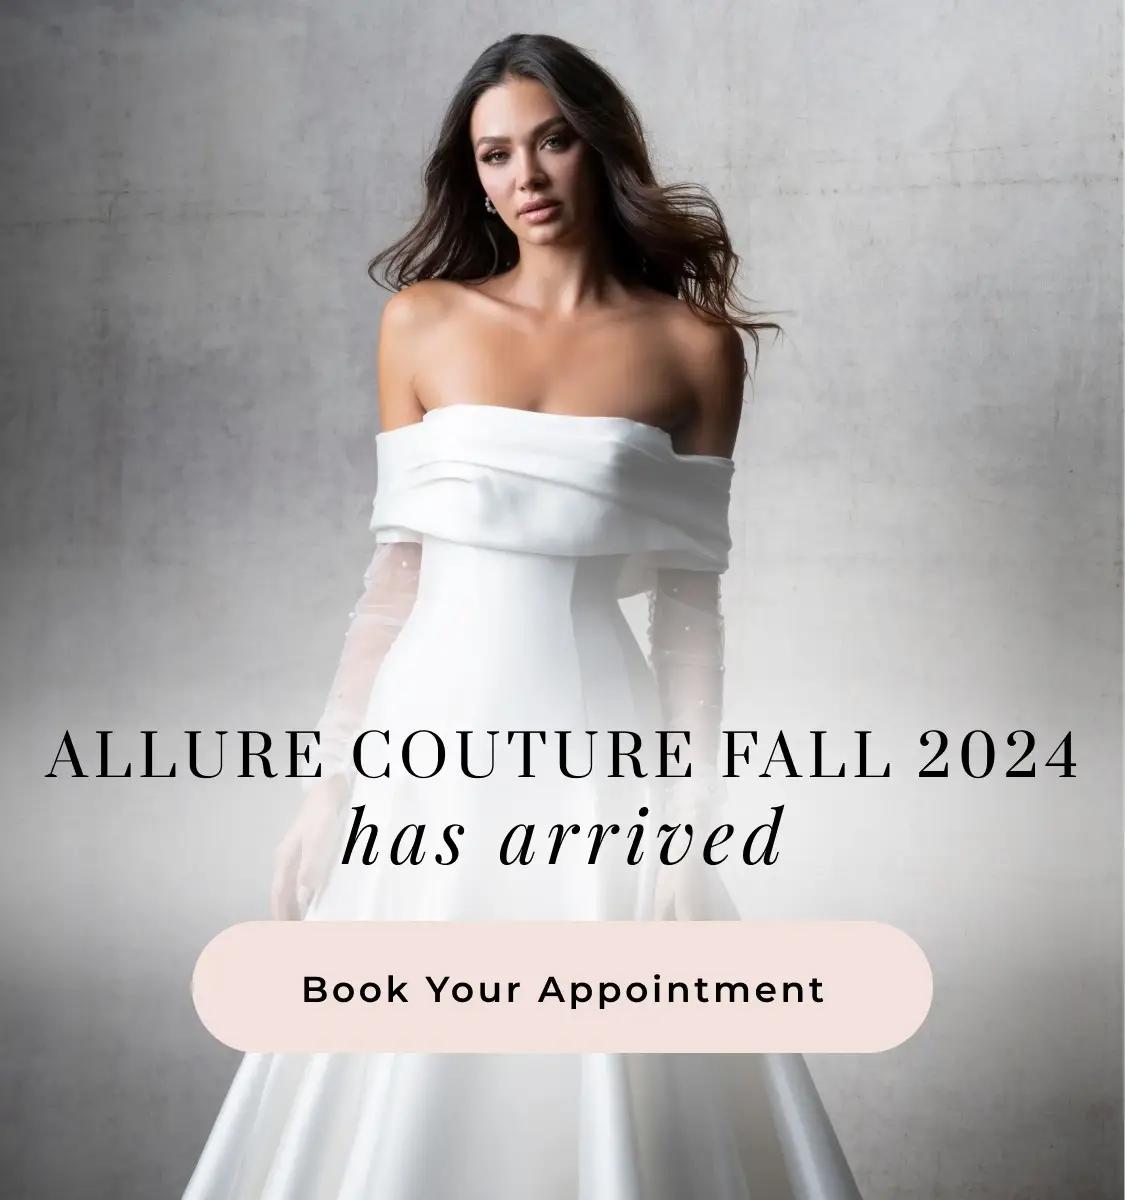 Allure Couture Fall 2024 Banner Mobile